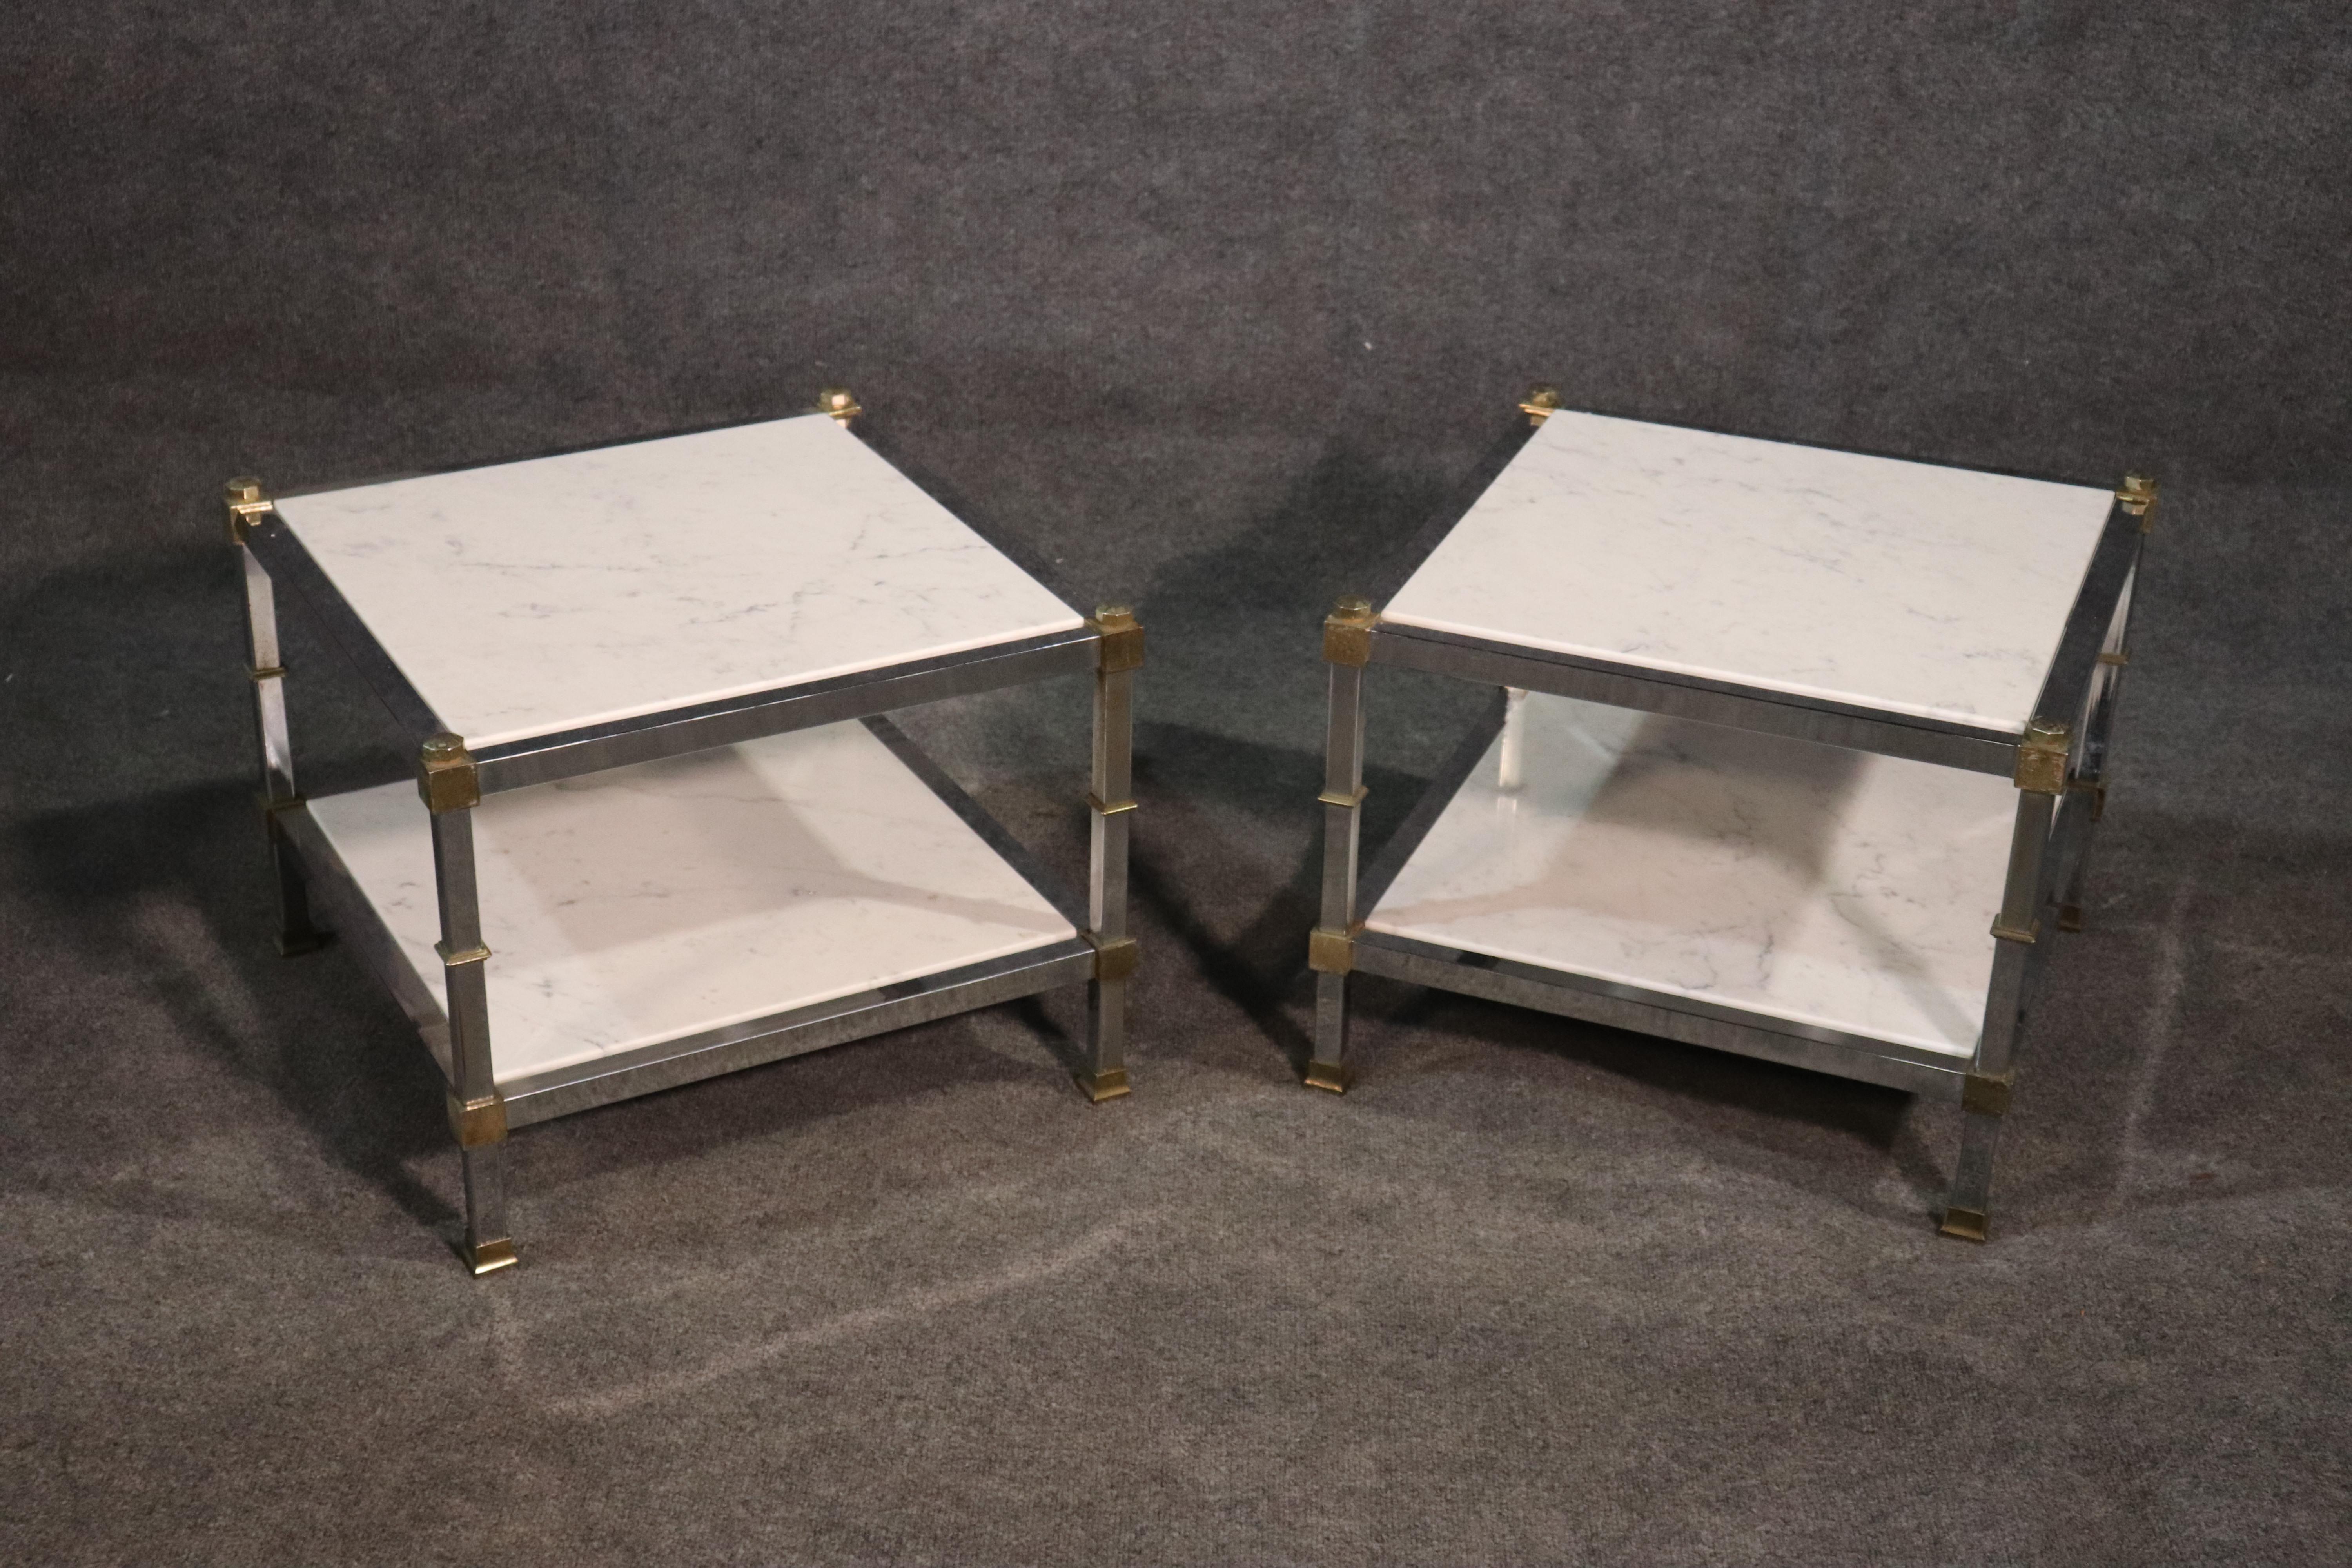 This is a pair of end tables with white marble tops and bottoms and brass and steel frames. designed in the manner of Maison Jansen, these end tables are perfect for a low Mid-Century Modern sofa. They date to the 1960s era.
Measures: 16.5 inches